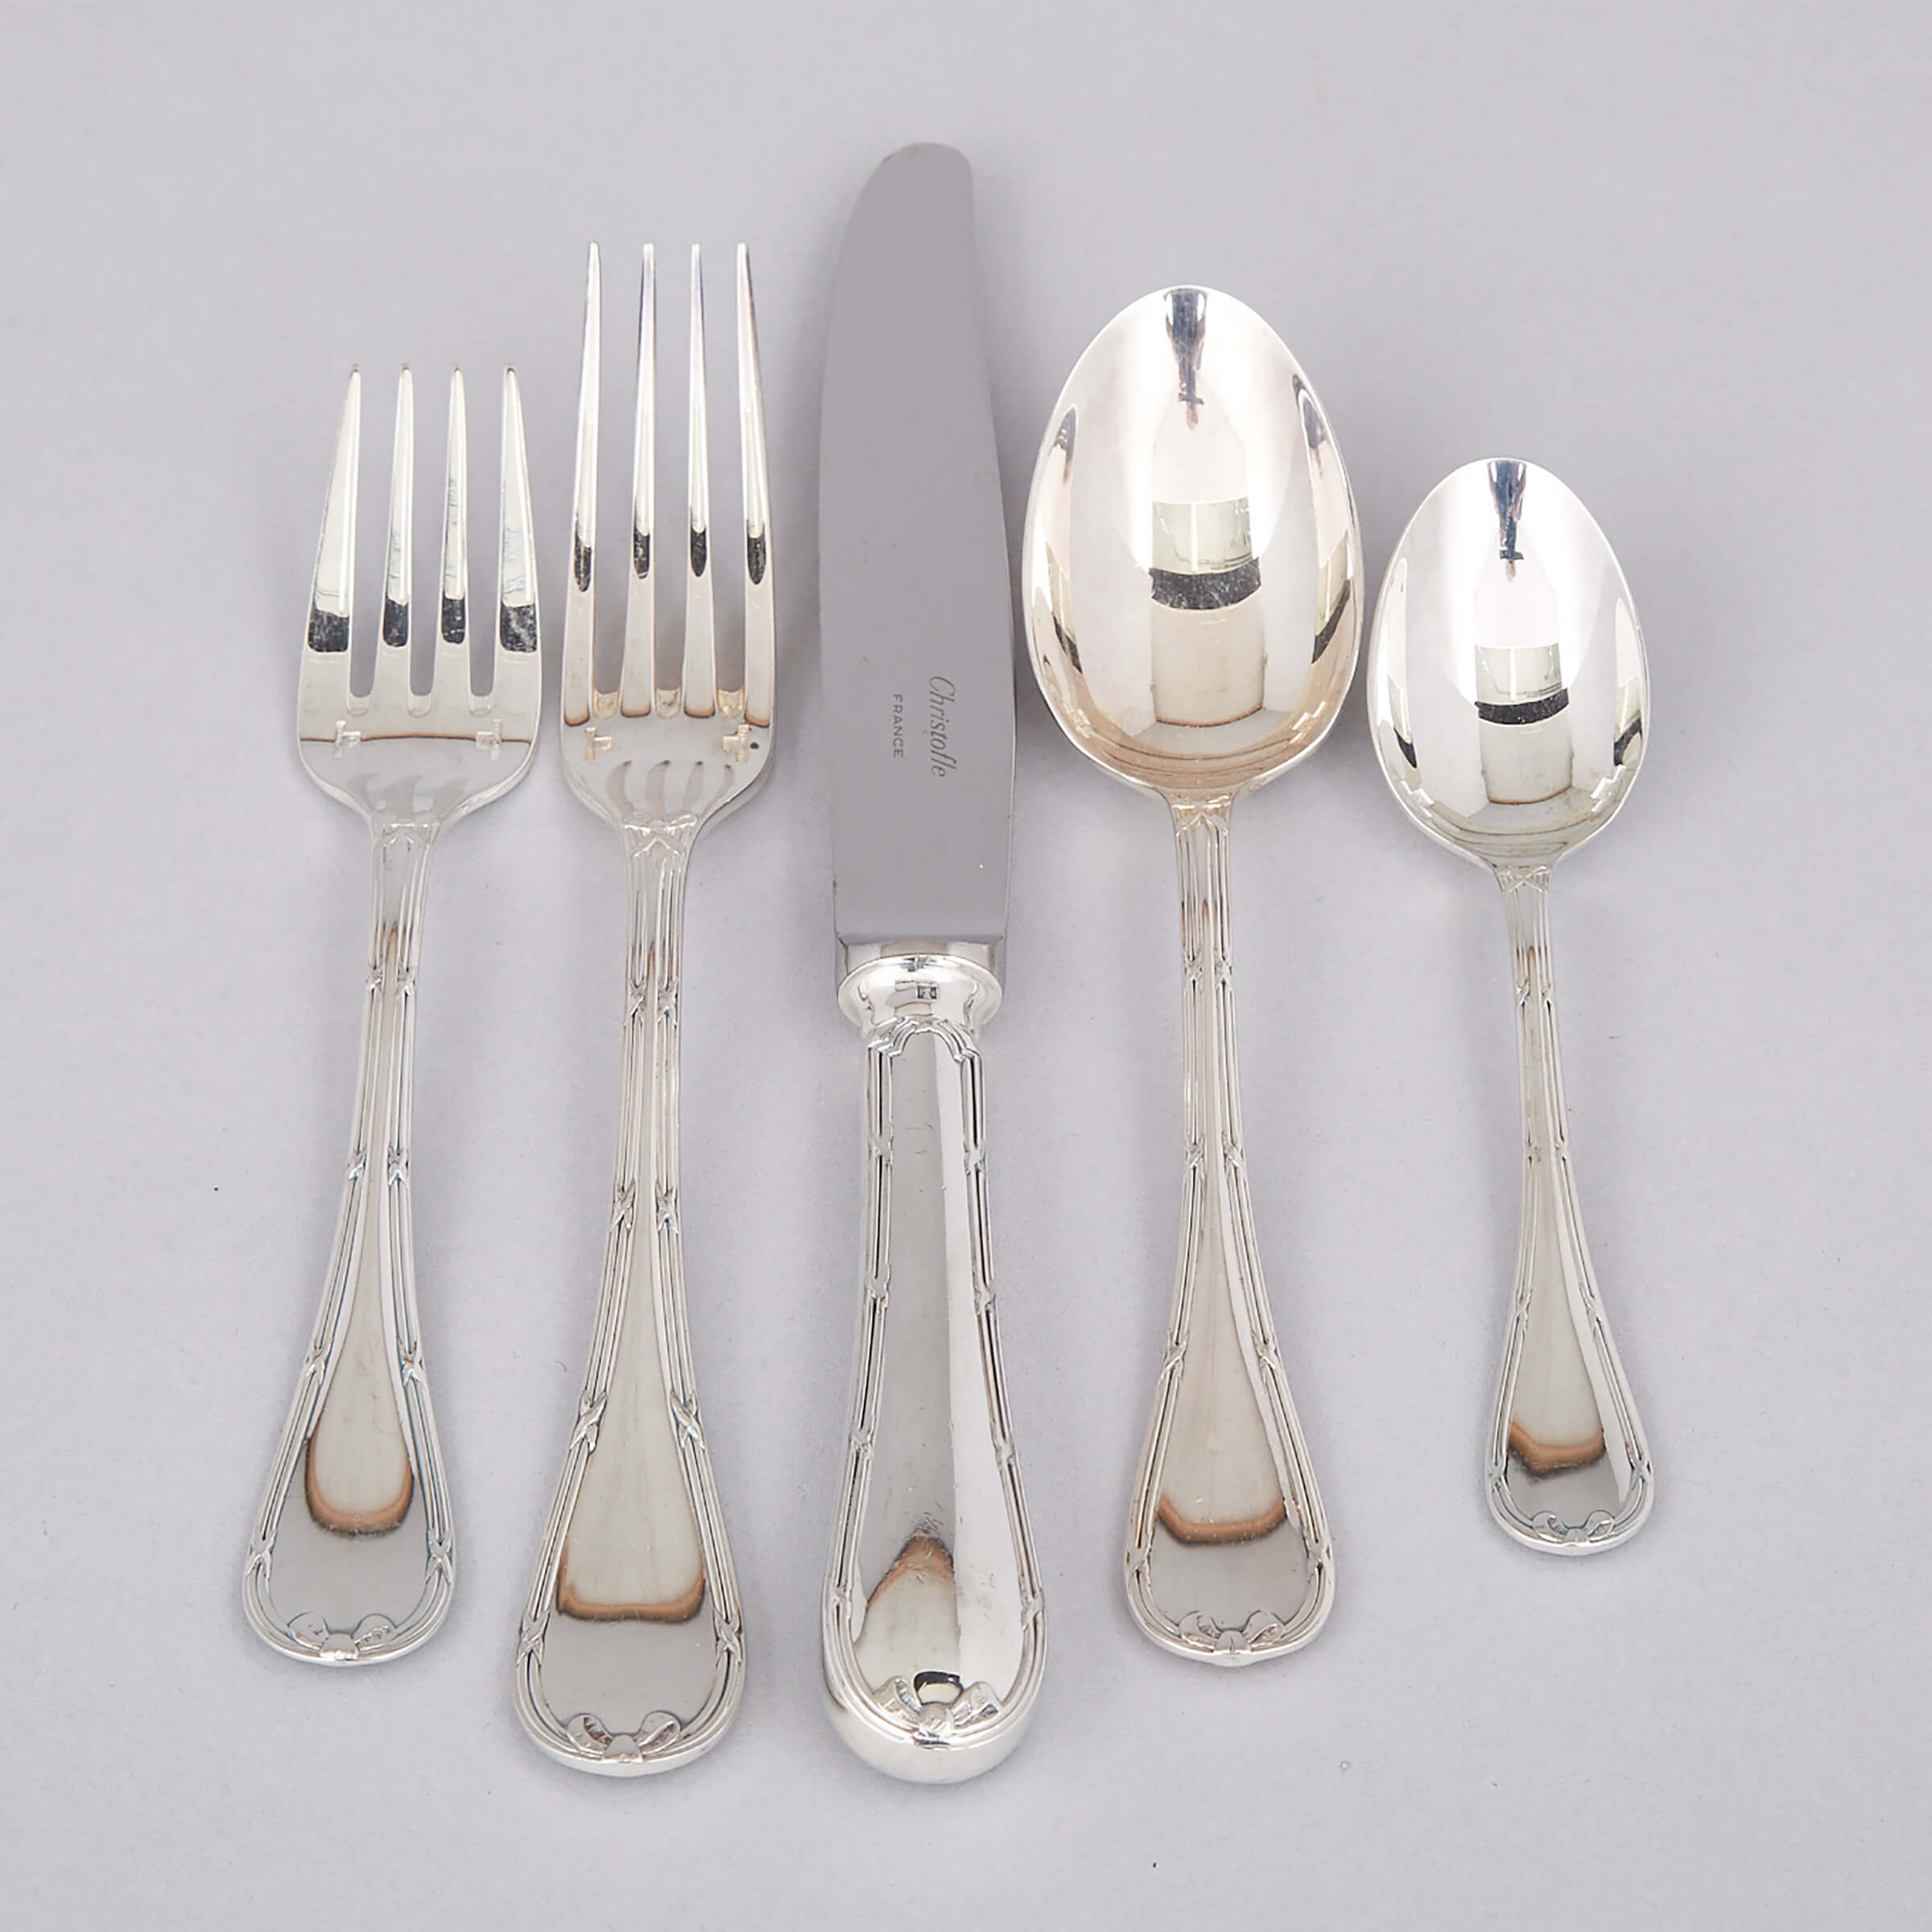 French Silver Plated ‘Rubans’ Pattern Flatware Service, Christofle, 20th century